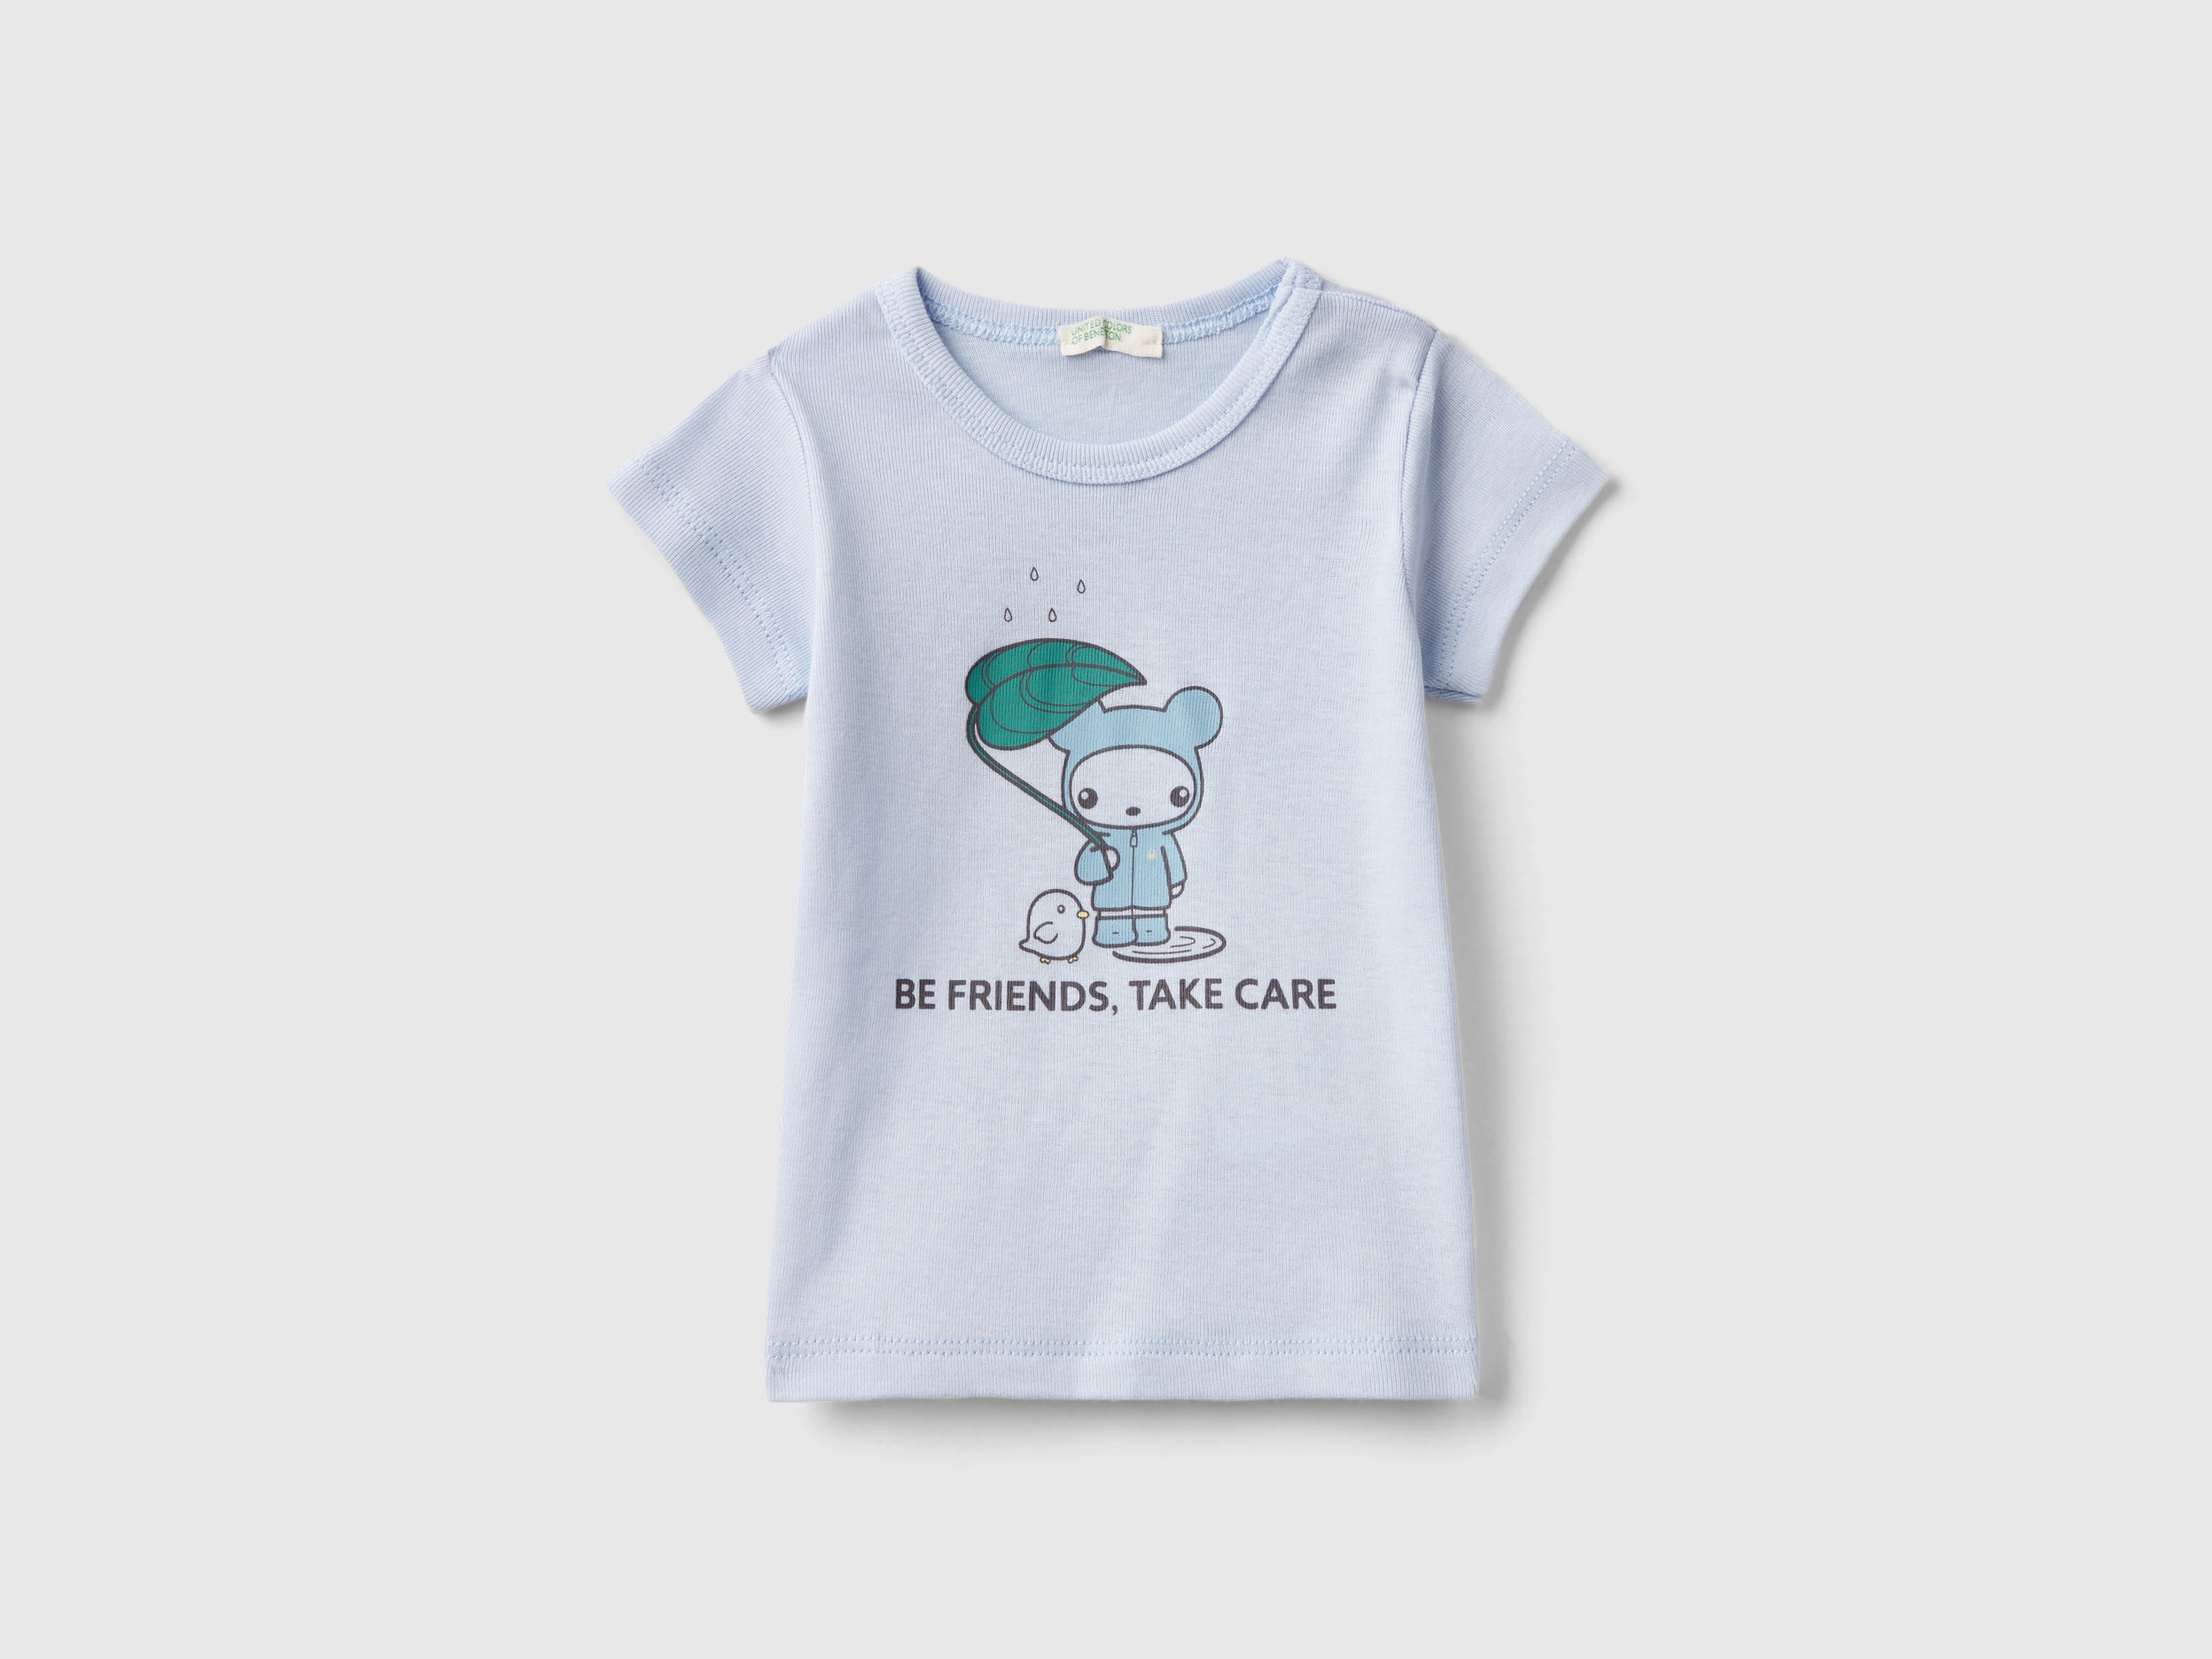 Image of Benetton, T-shirt In 100% Organic Cotton, size 56, Sky Blue, Kids